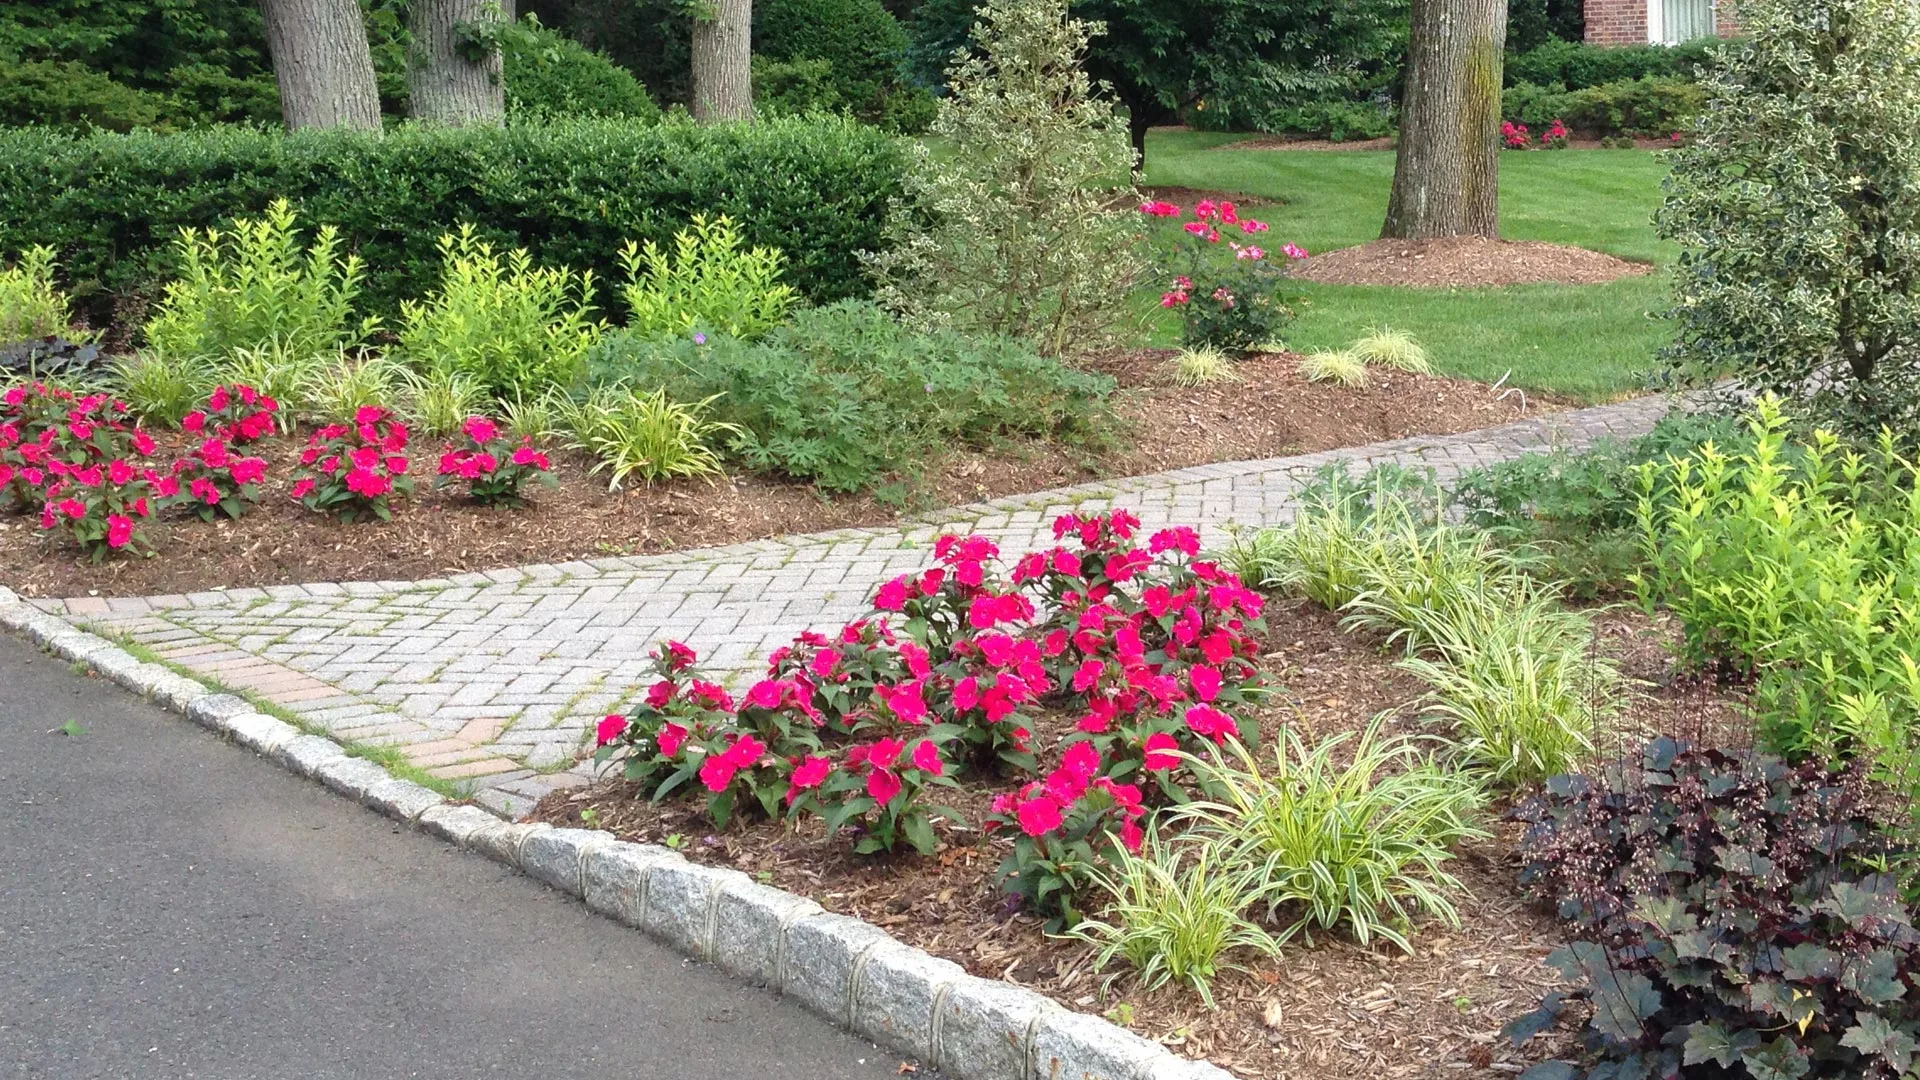 Professionally maintained landscape design at a residential property in Watchung.